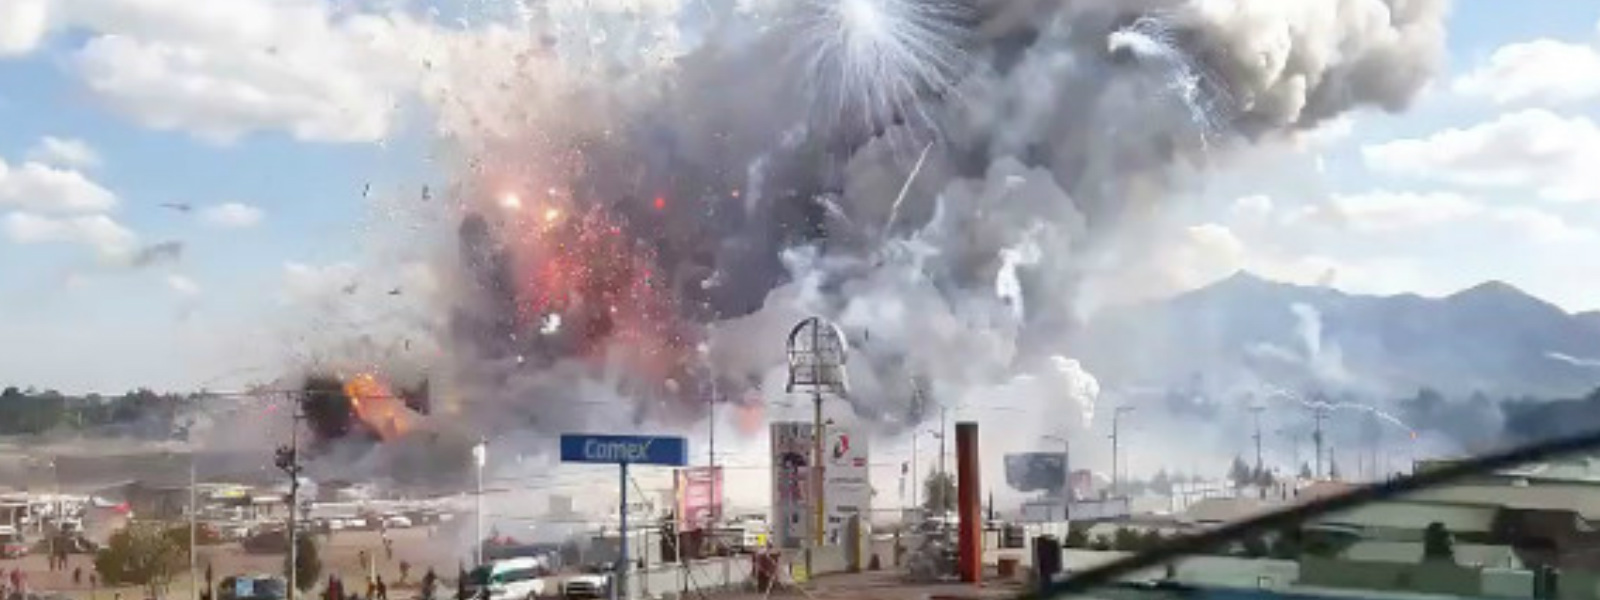 Over 50 killed & injured in Mexico firework blast